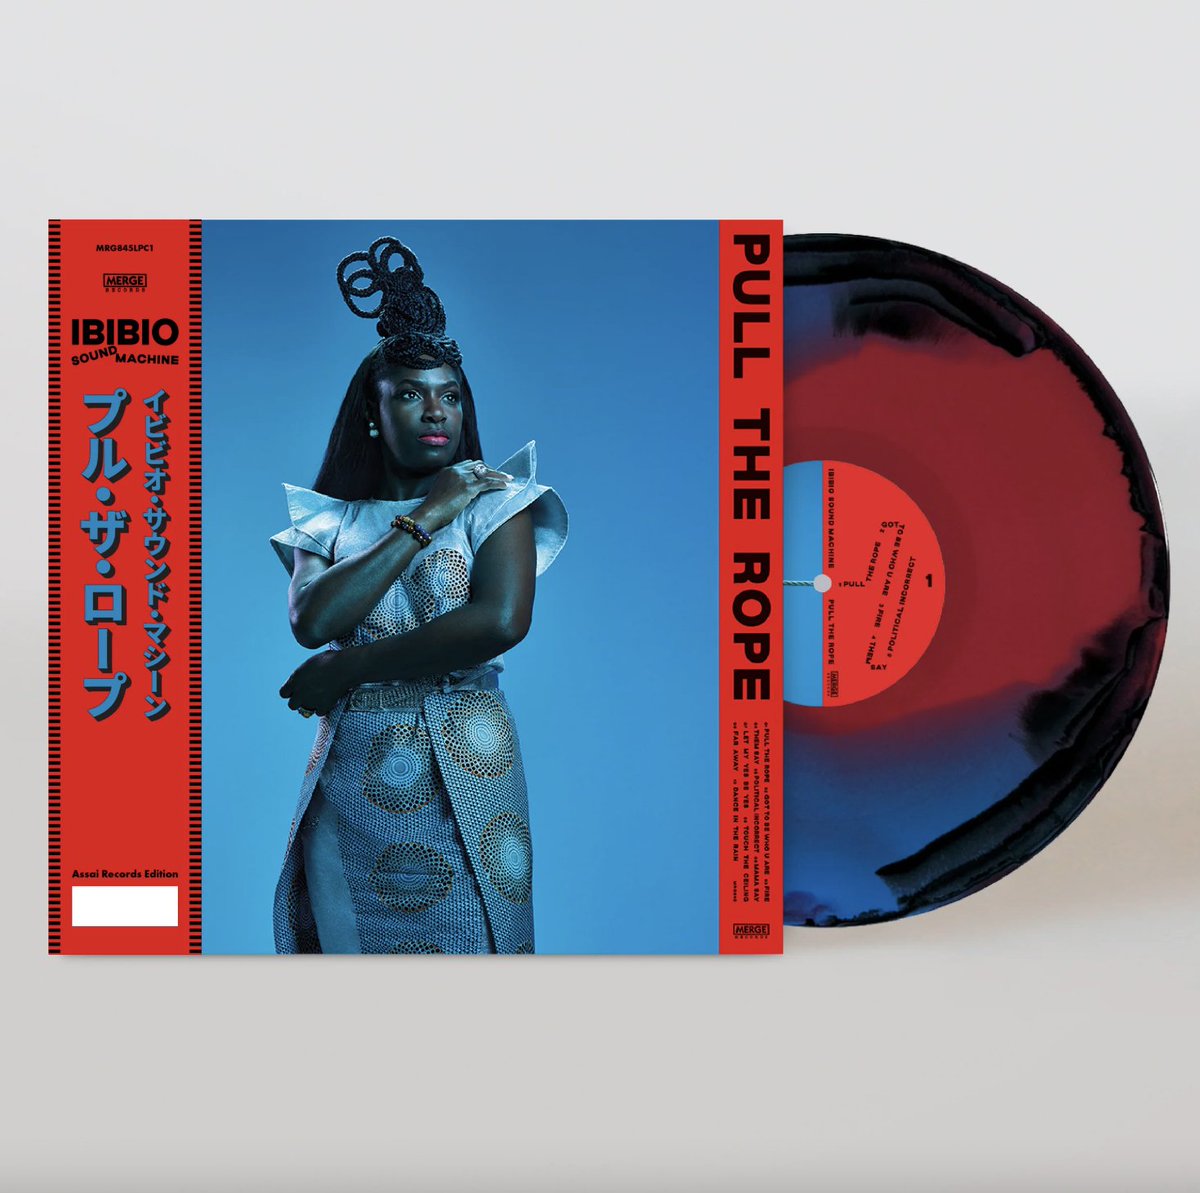 Check out this ltd edition (and signed!) variant of @IbibioSound's upcoming album 'Pull the Rope' available from @Assai_UK! 😍 Pre-order: tinyurl.com/2sadypmd -Assai Records Exclusive Japanese Inspired Obi Strip -Black + Blue + Red Vinyl -Limited to 100 copies -Hand-numbered